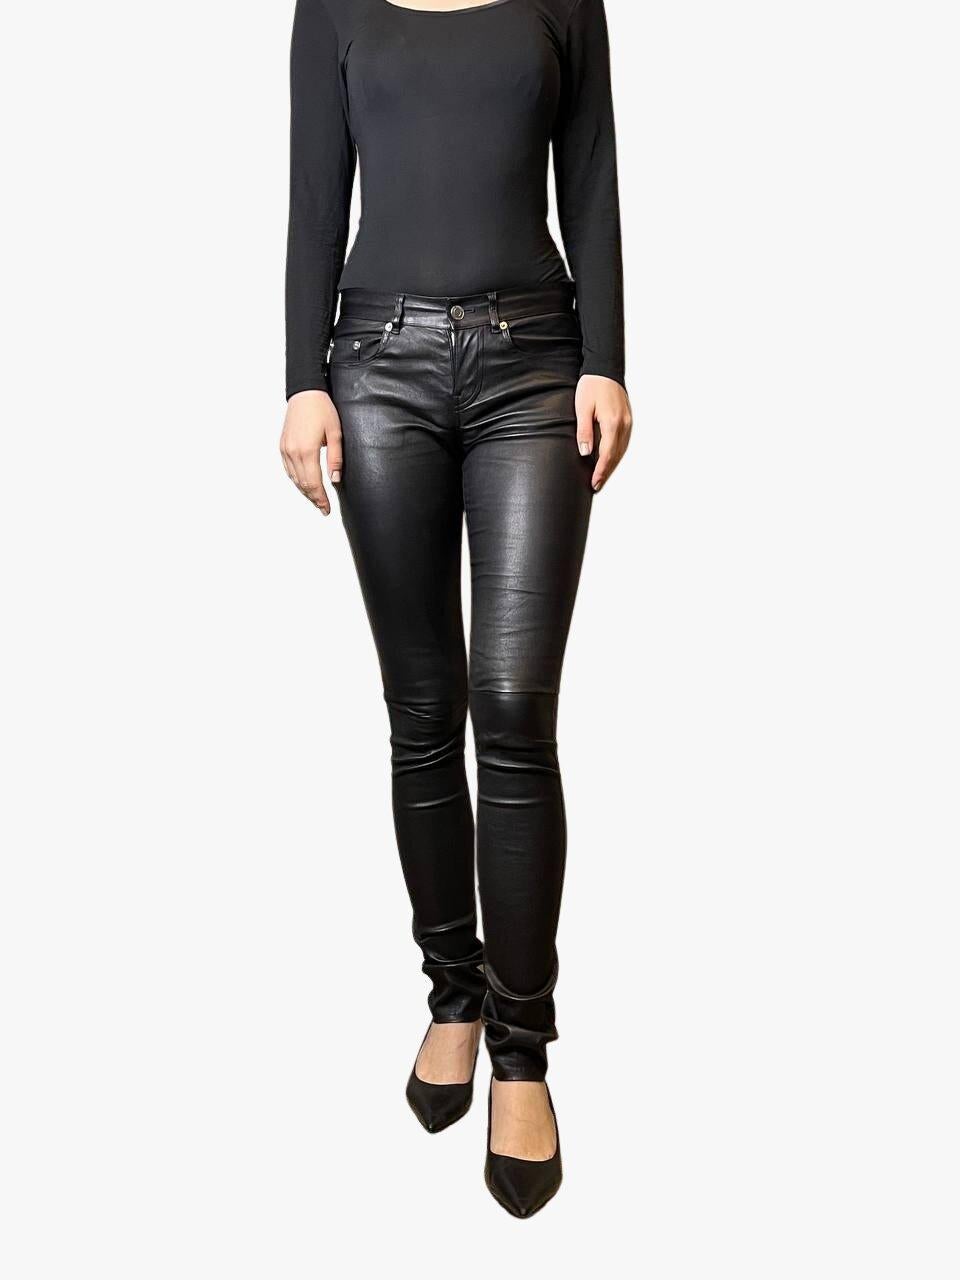 Black Yves Saint Laurent Skinny Stretch Leather Pants, 2010s  For Sale